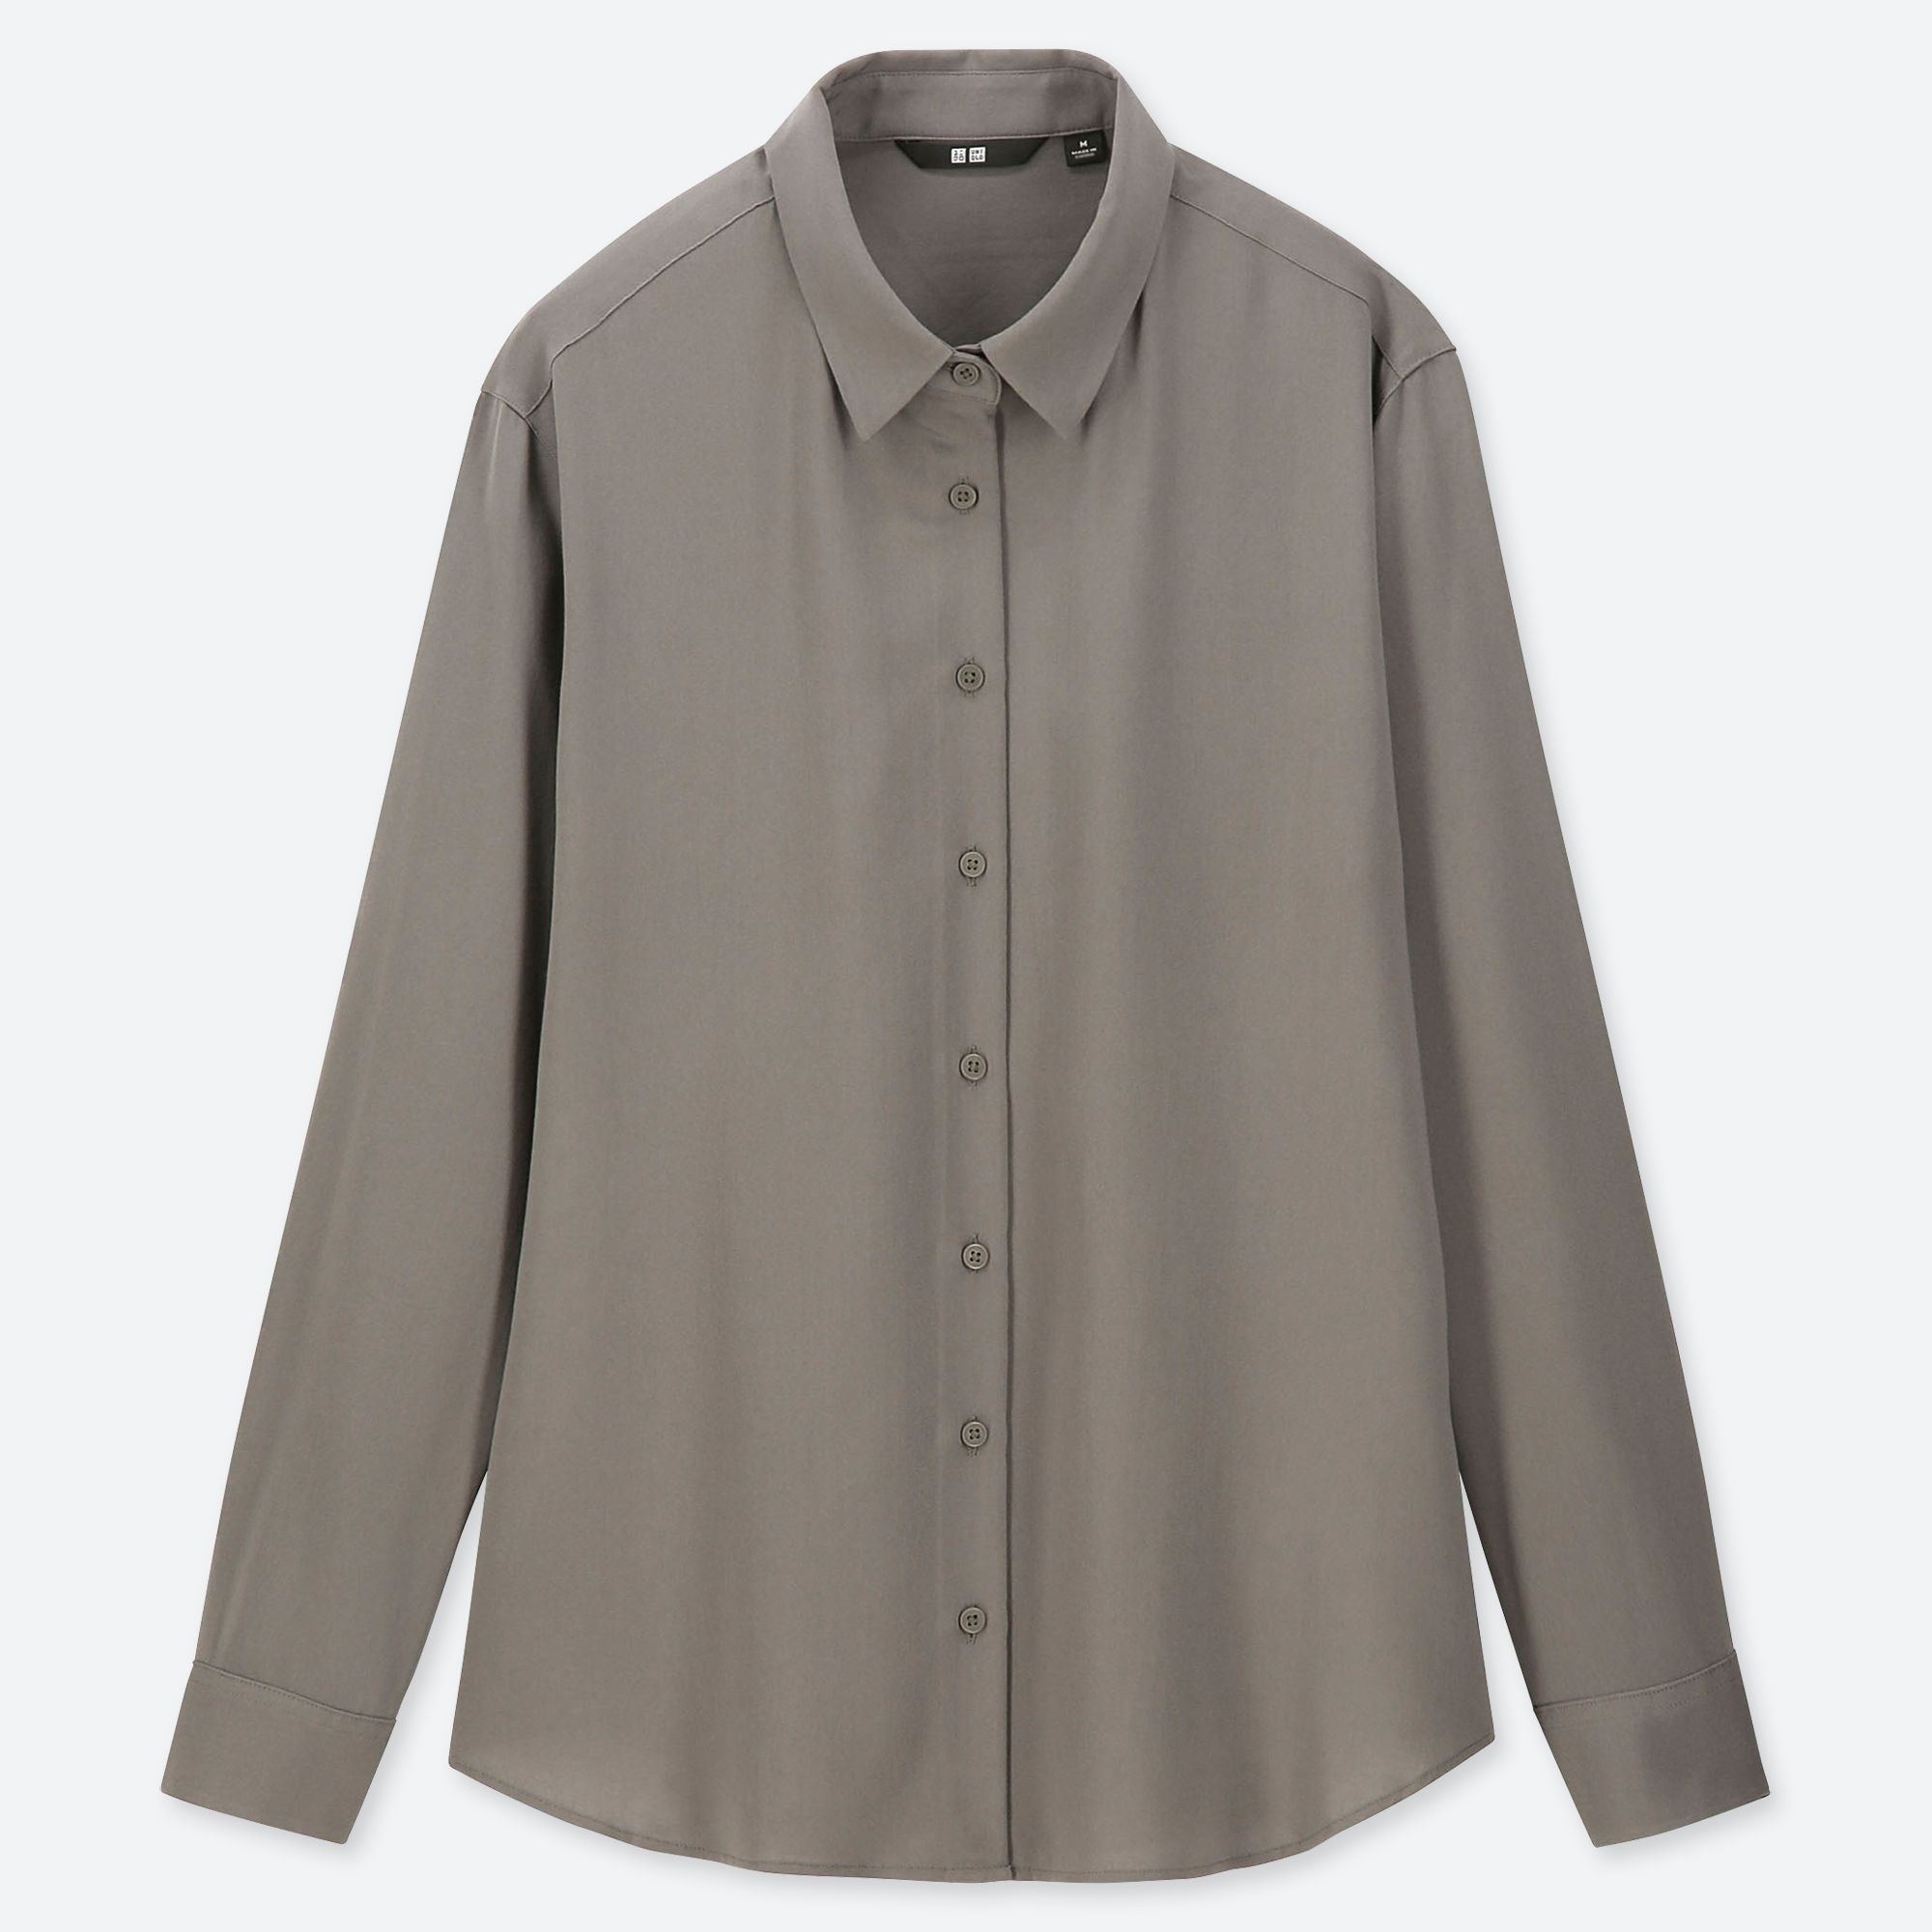 Women's Shirts and Blouses | UNIQLO US